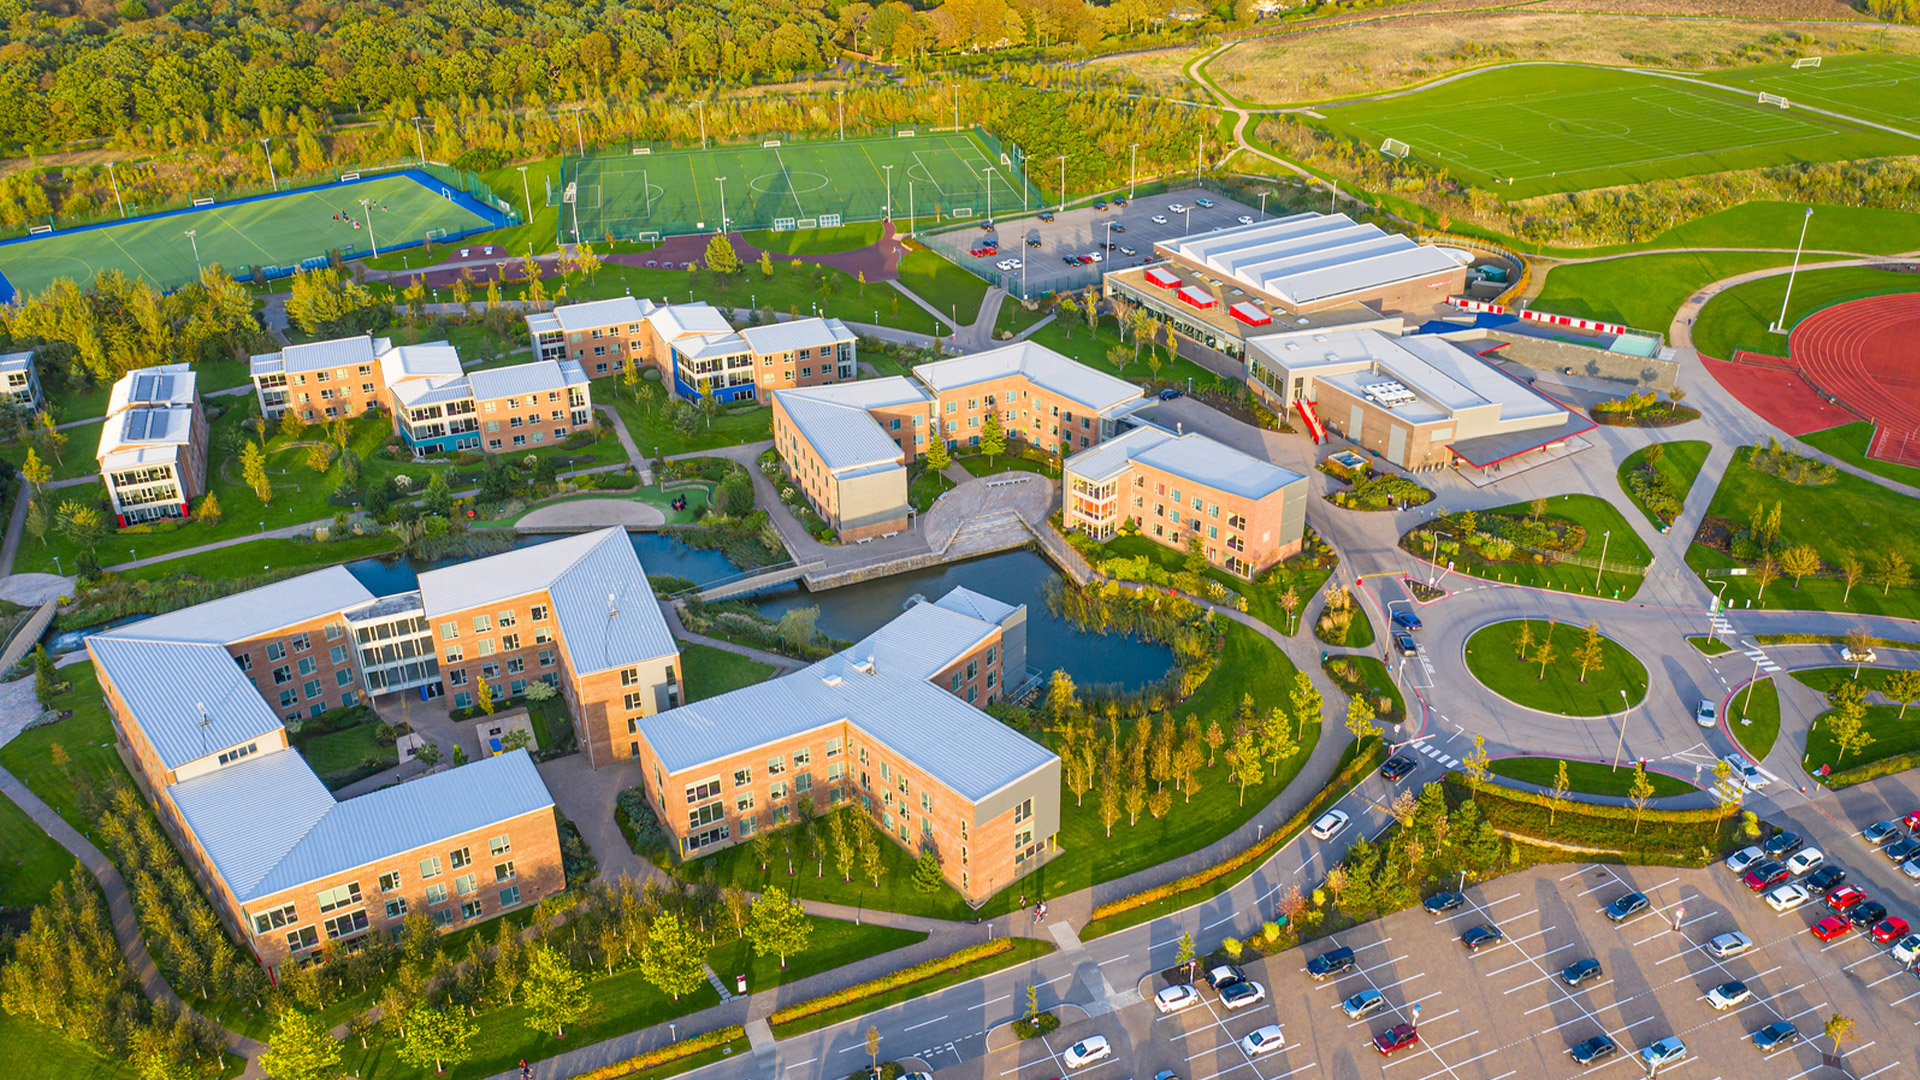 An aerial image of the Edge Hill University campus